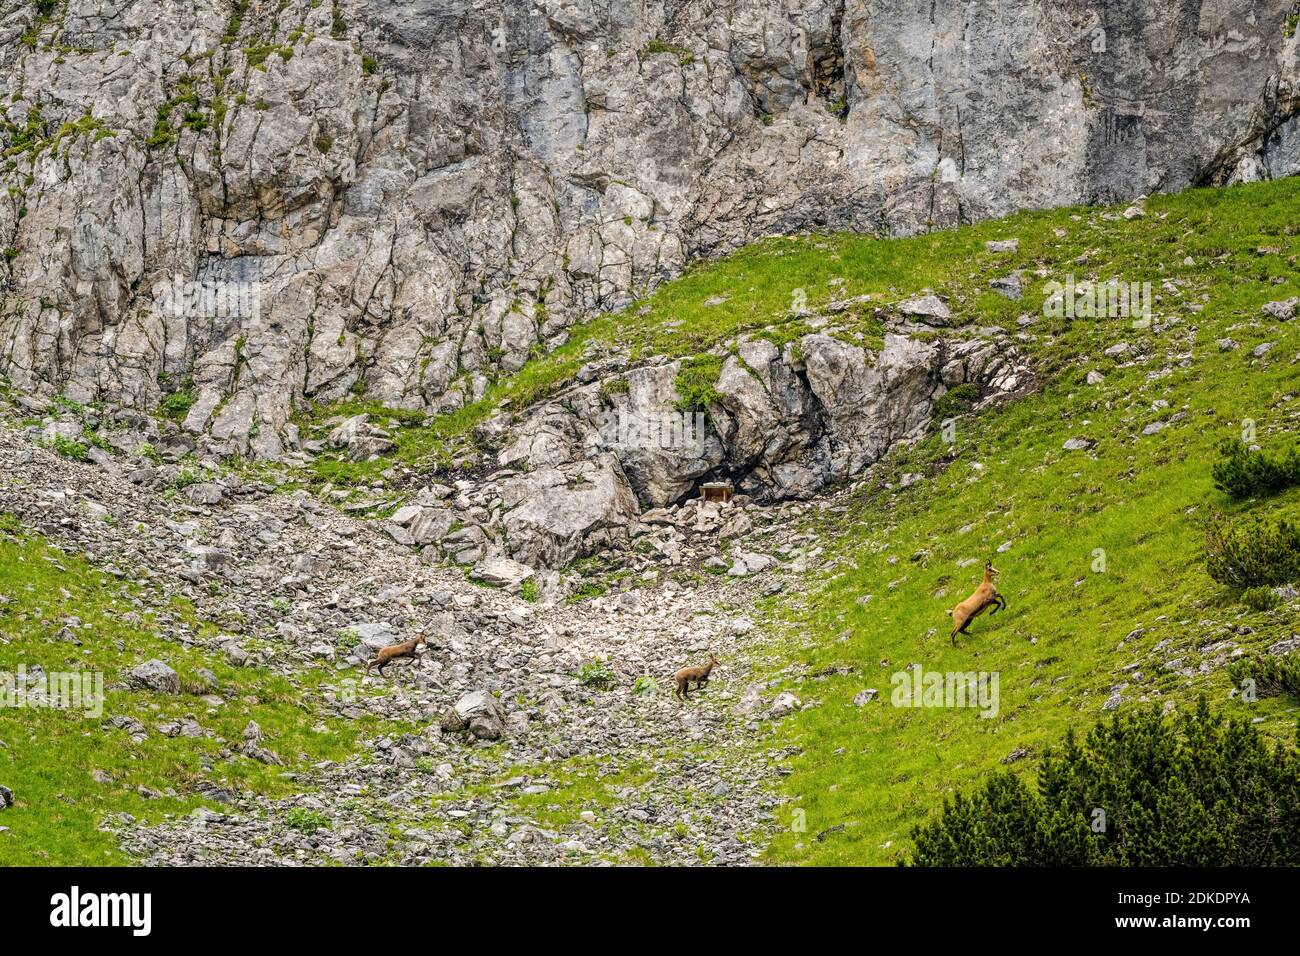 A group of chamois with young animals runs along a mountain slope Stock Photo